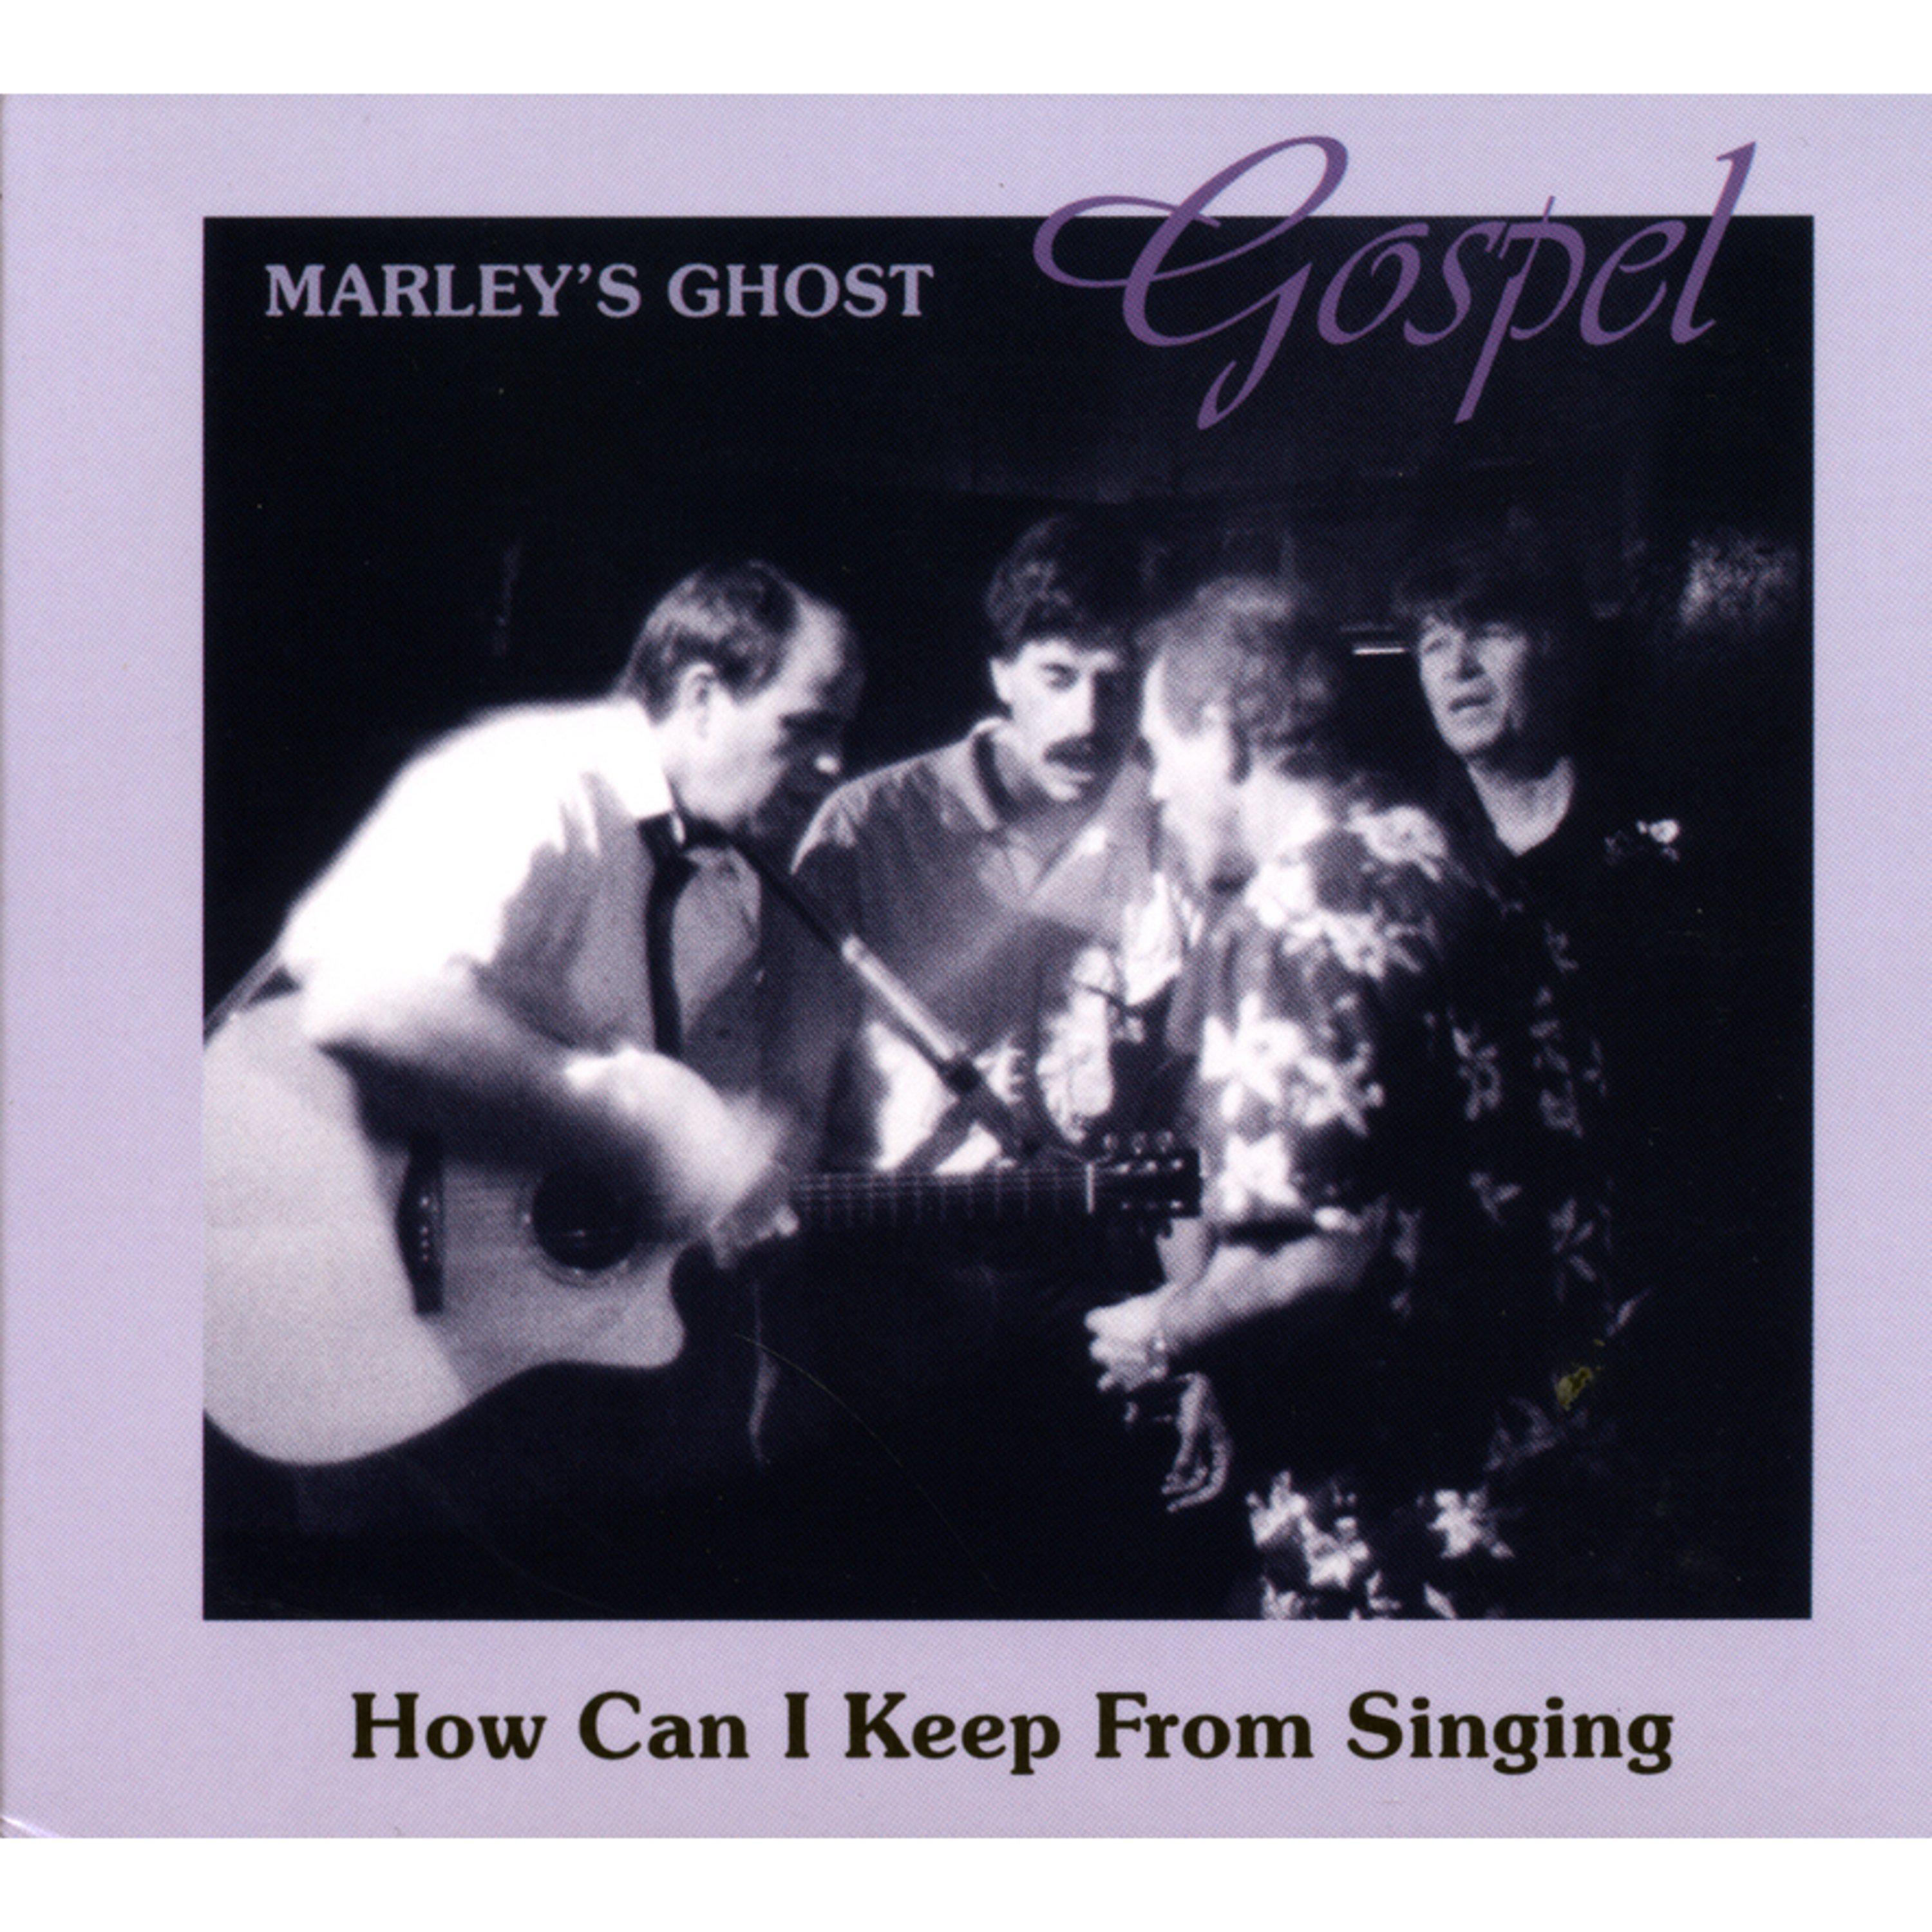 Gospel: How Can I Keep From Singing